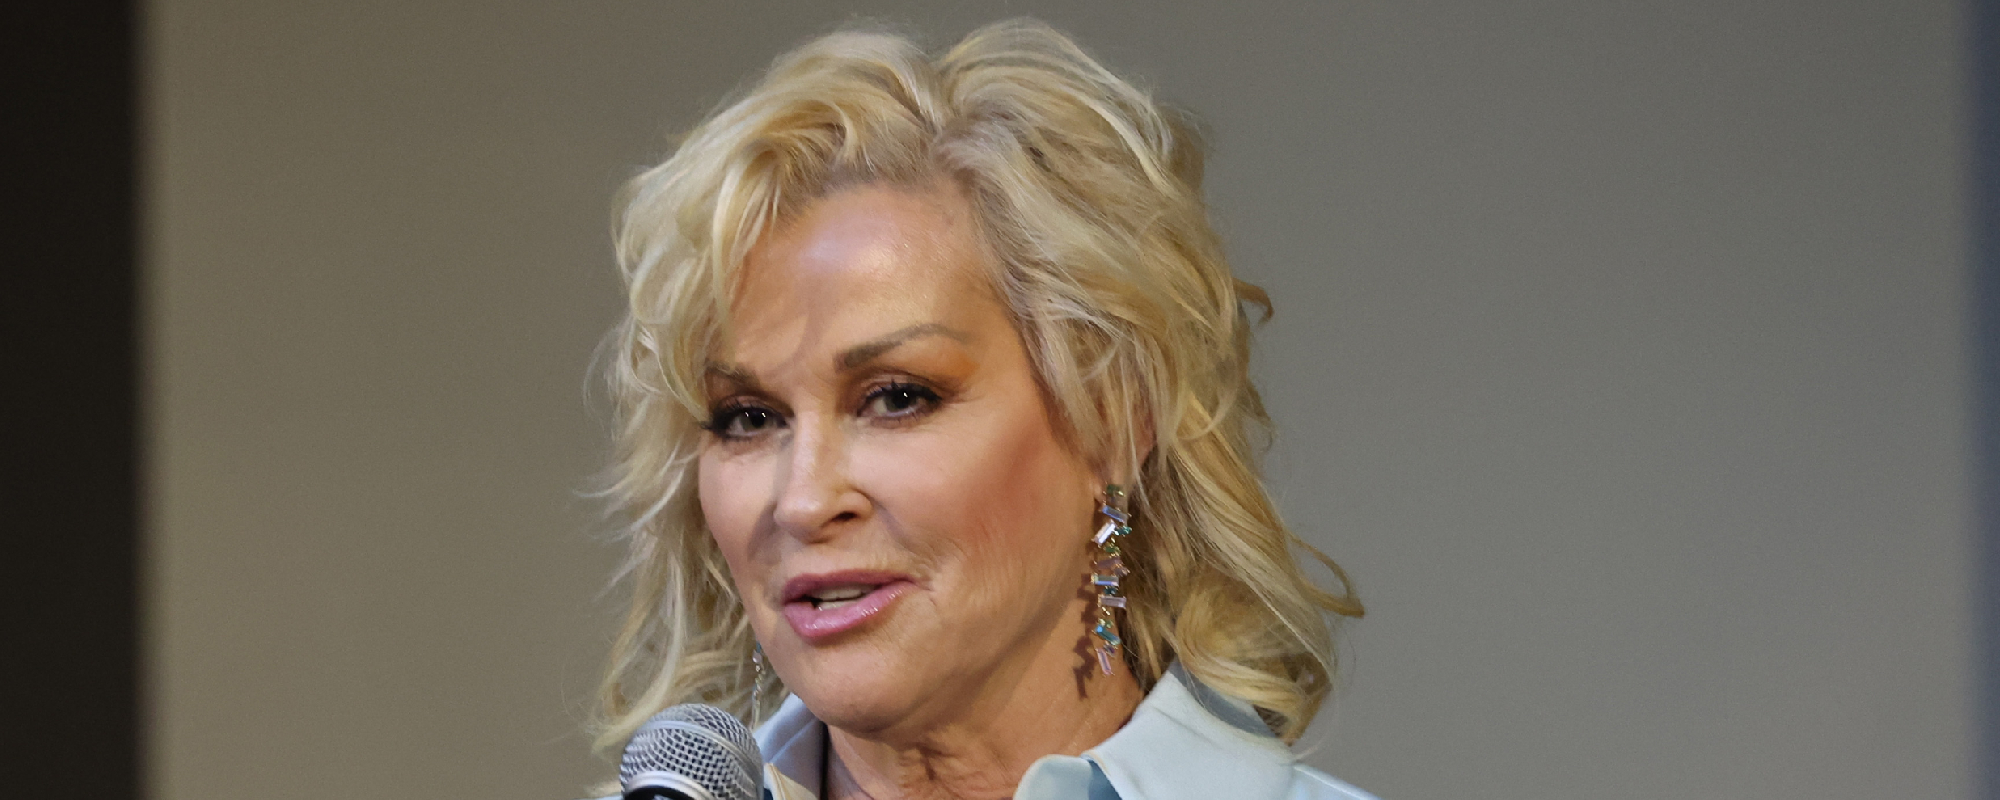 Lorrie Morgan Celebrates Her "Ruby Anniversary" and Recalls the Christmas Gift George Jones Offered Her